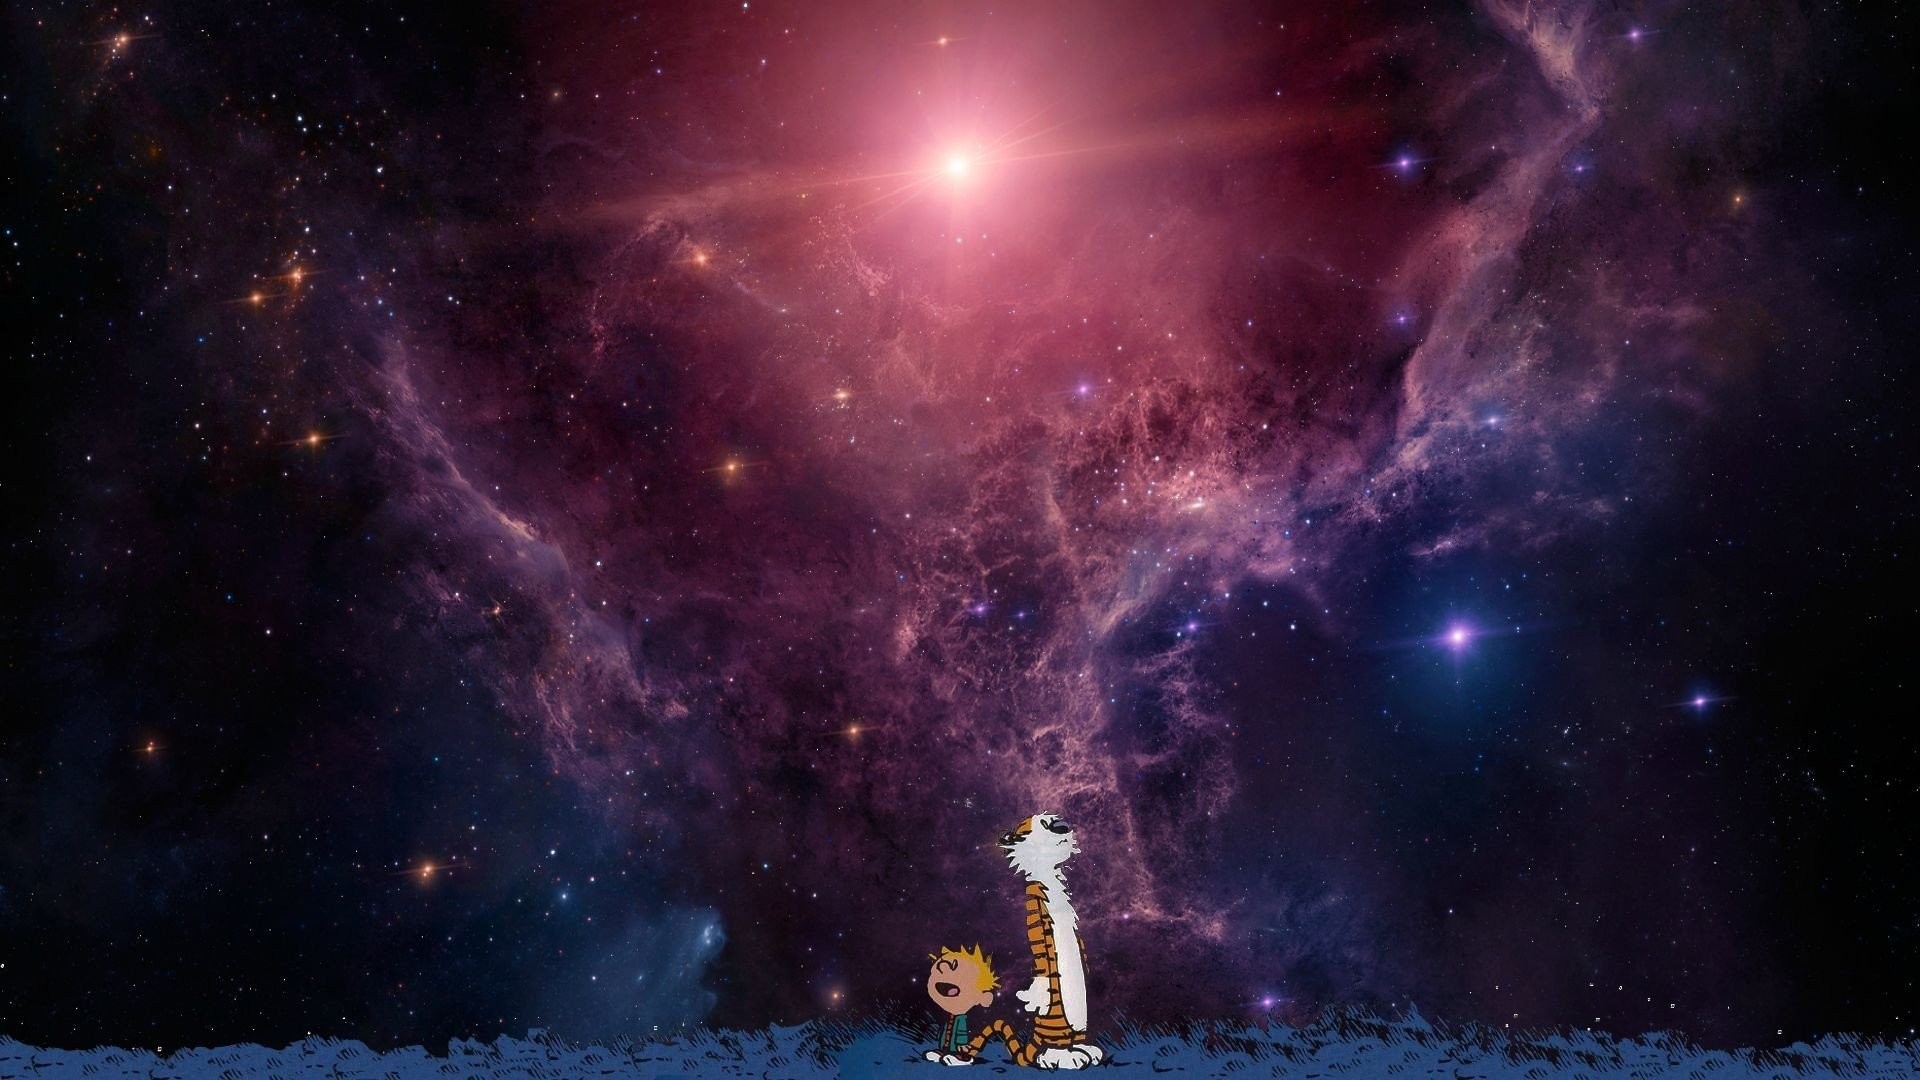 1920x1080 space wallpaper calvin and hobbes